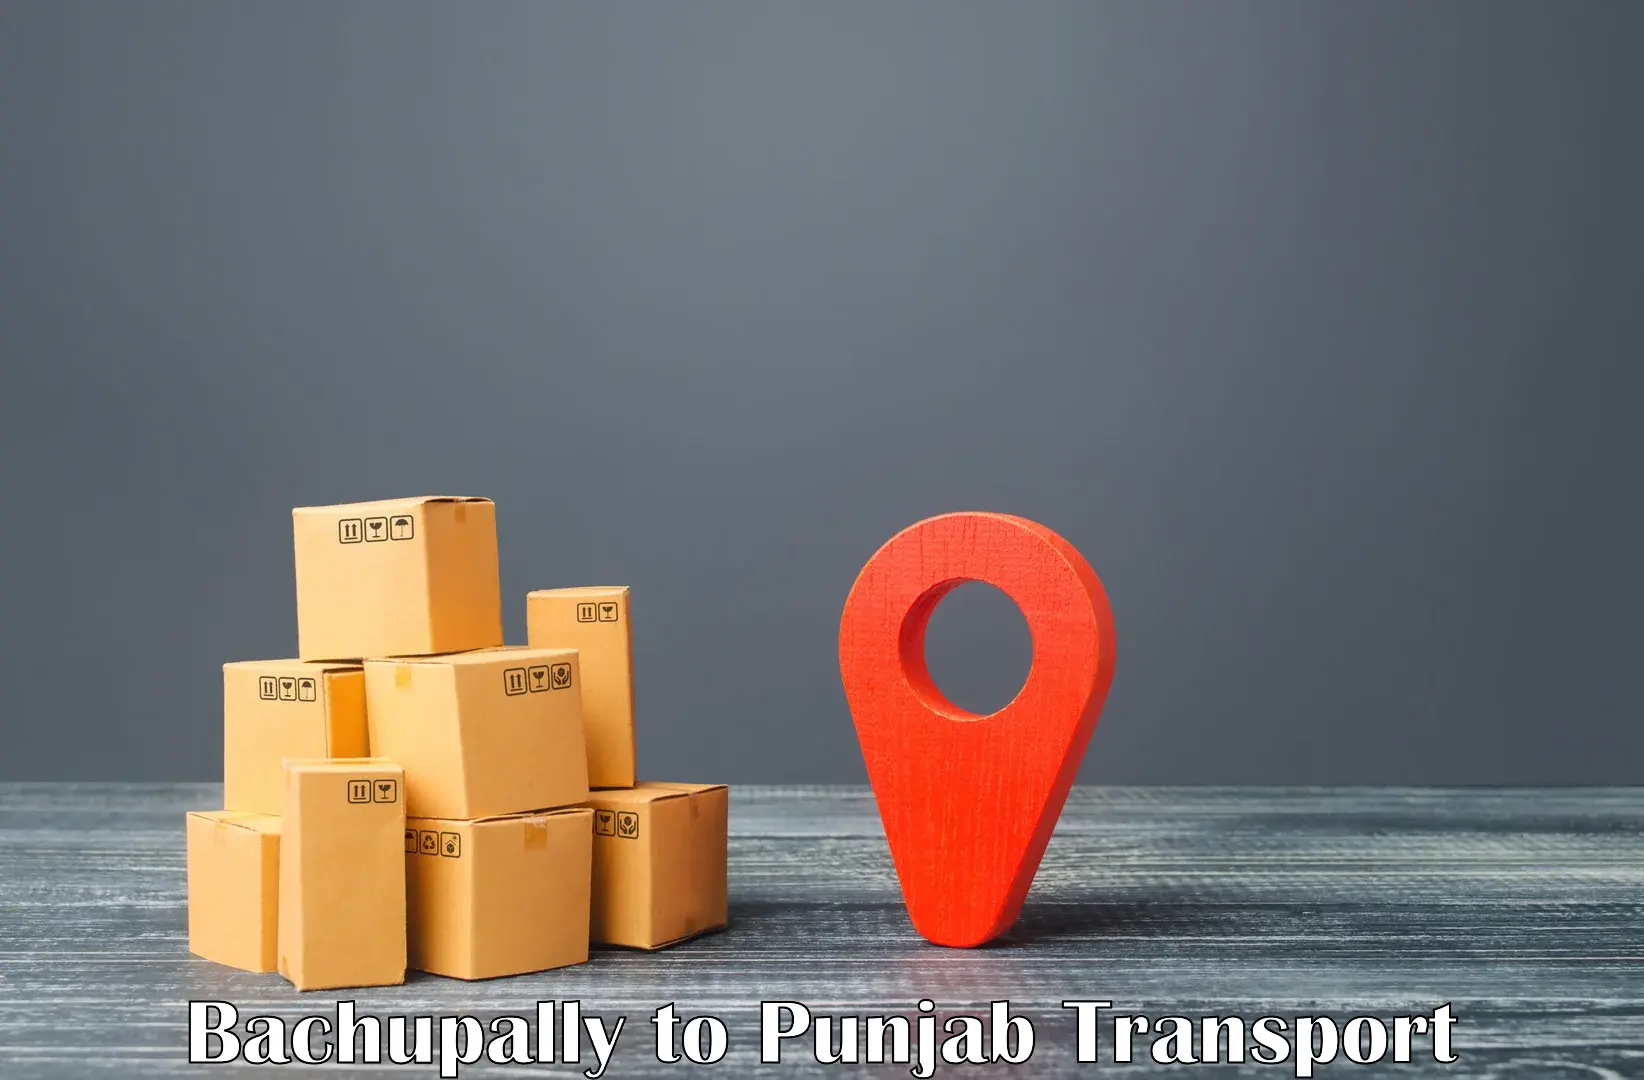 Delivery service in Bachupally to Nakodar